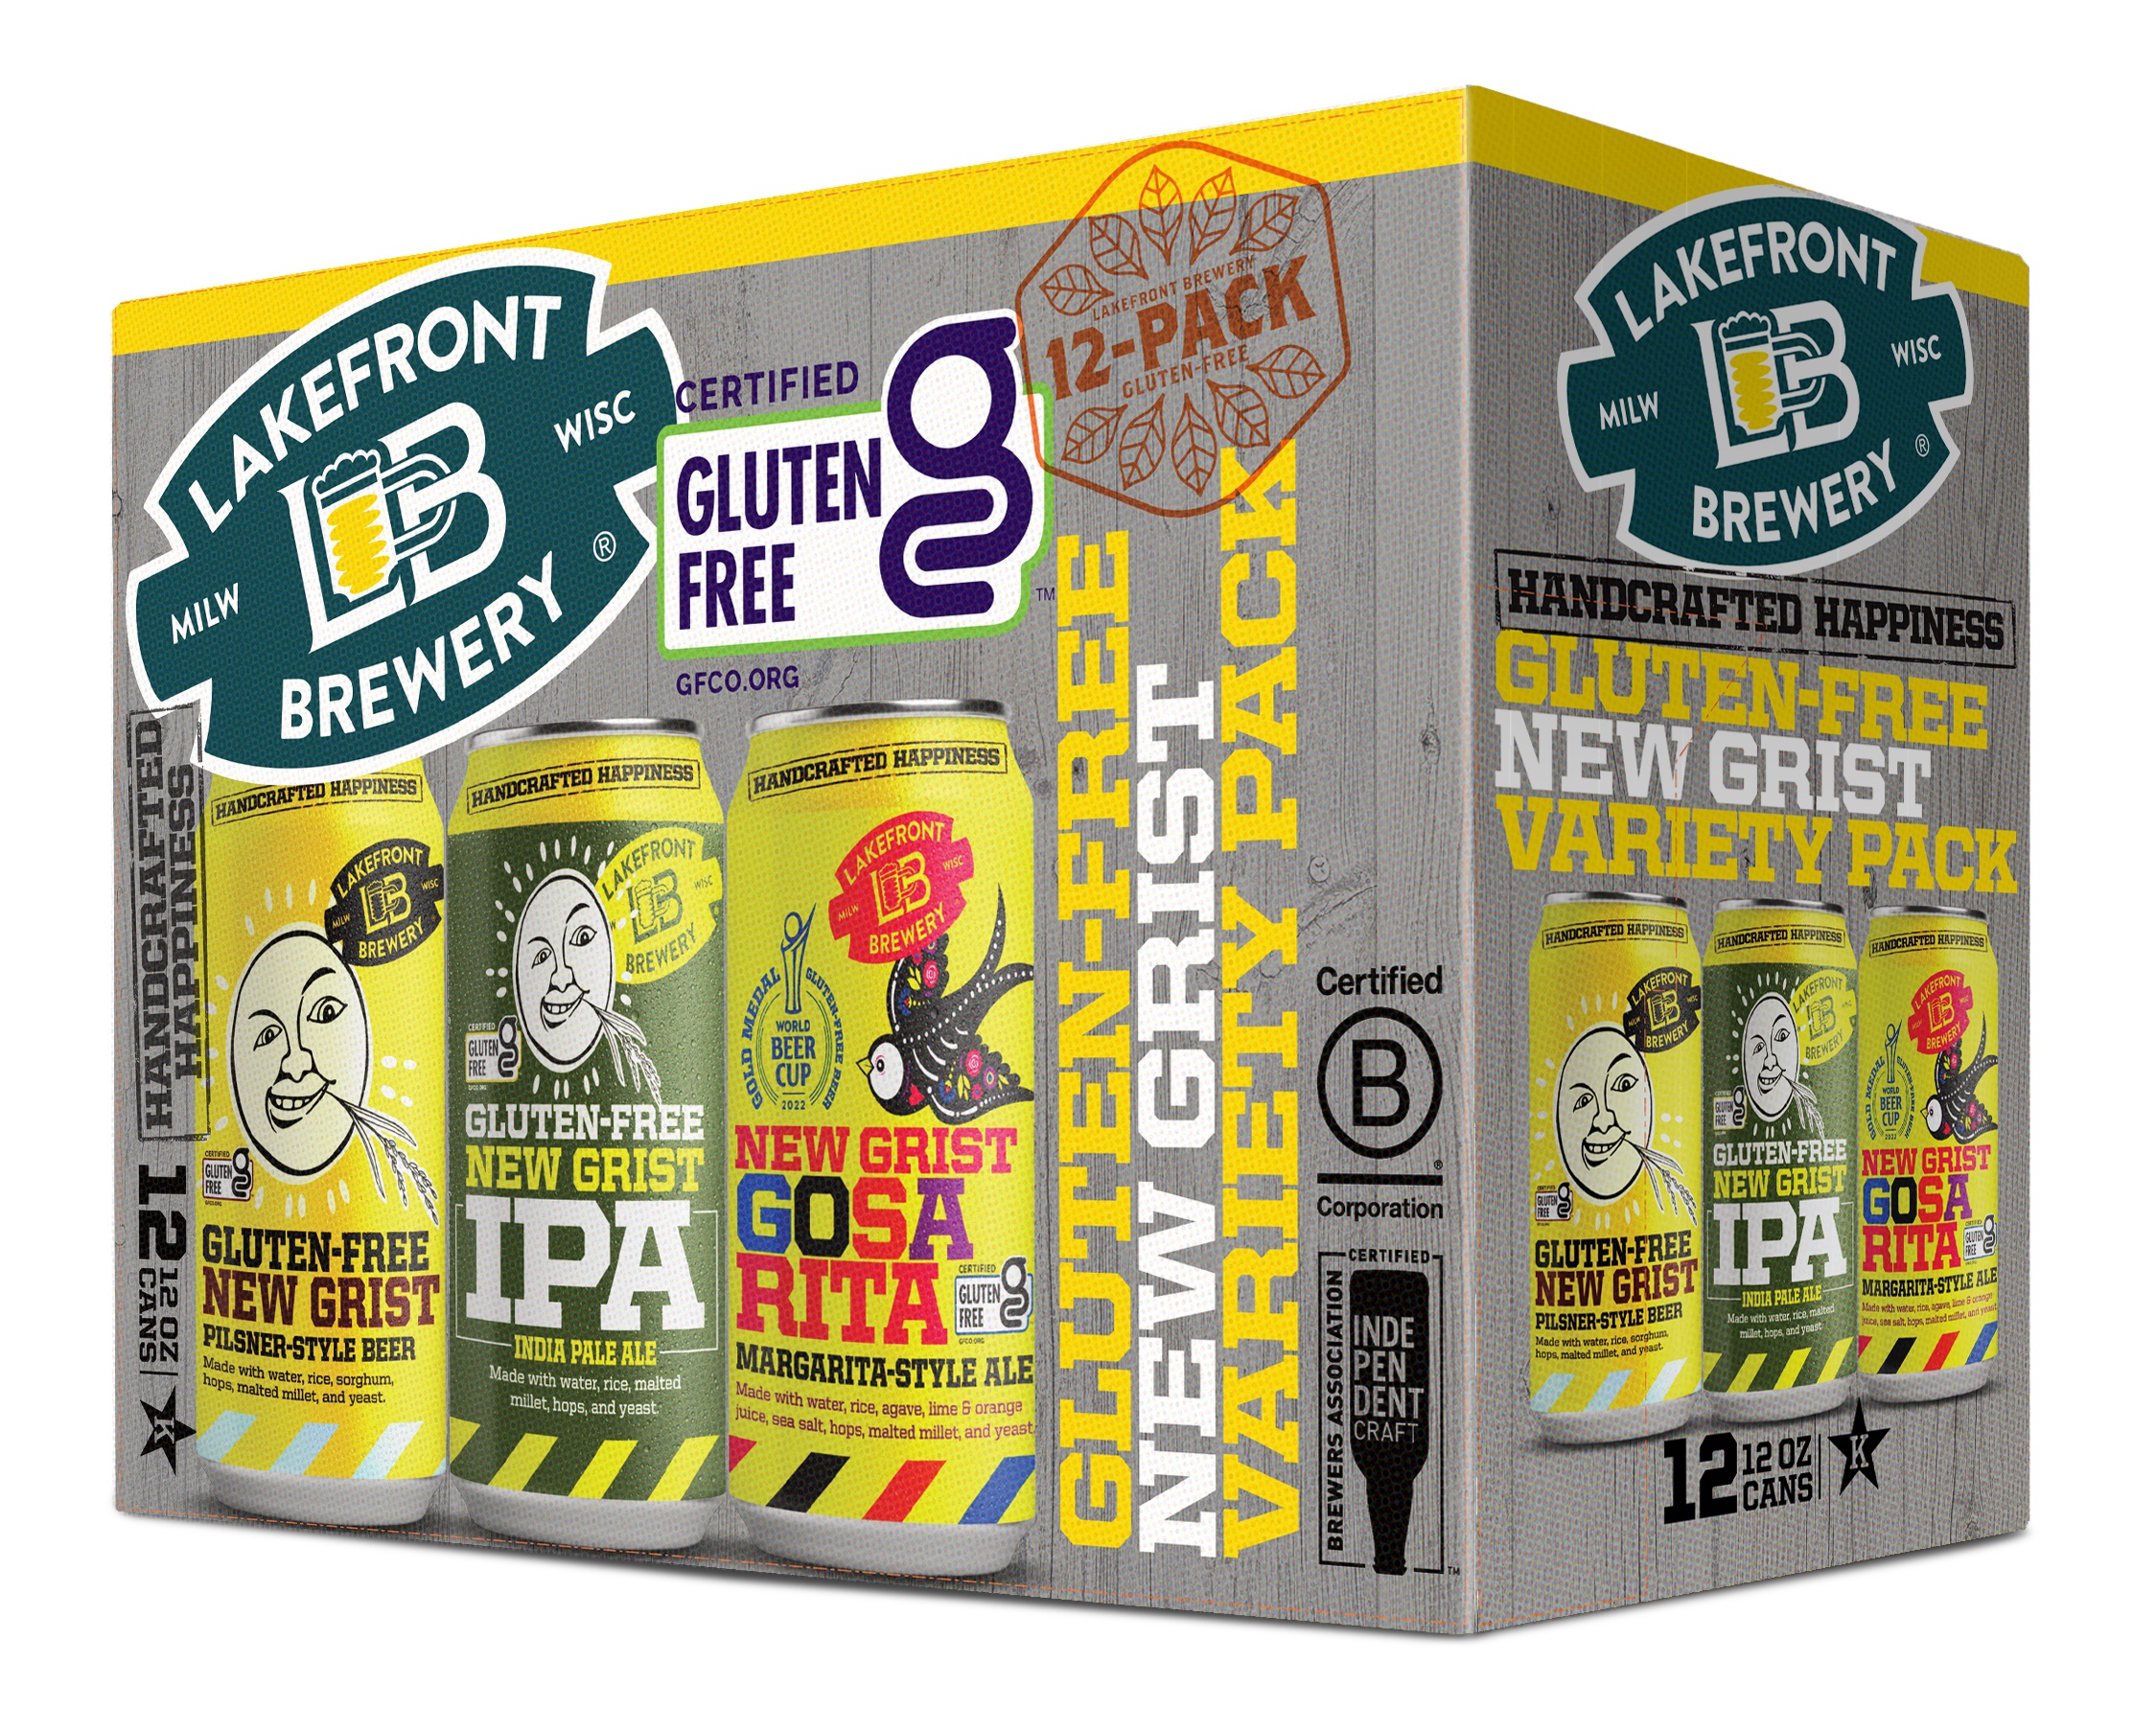 Lakefront Brewery Releases All Gluten-free Variety Pack